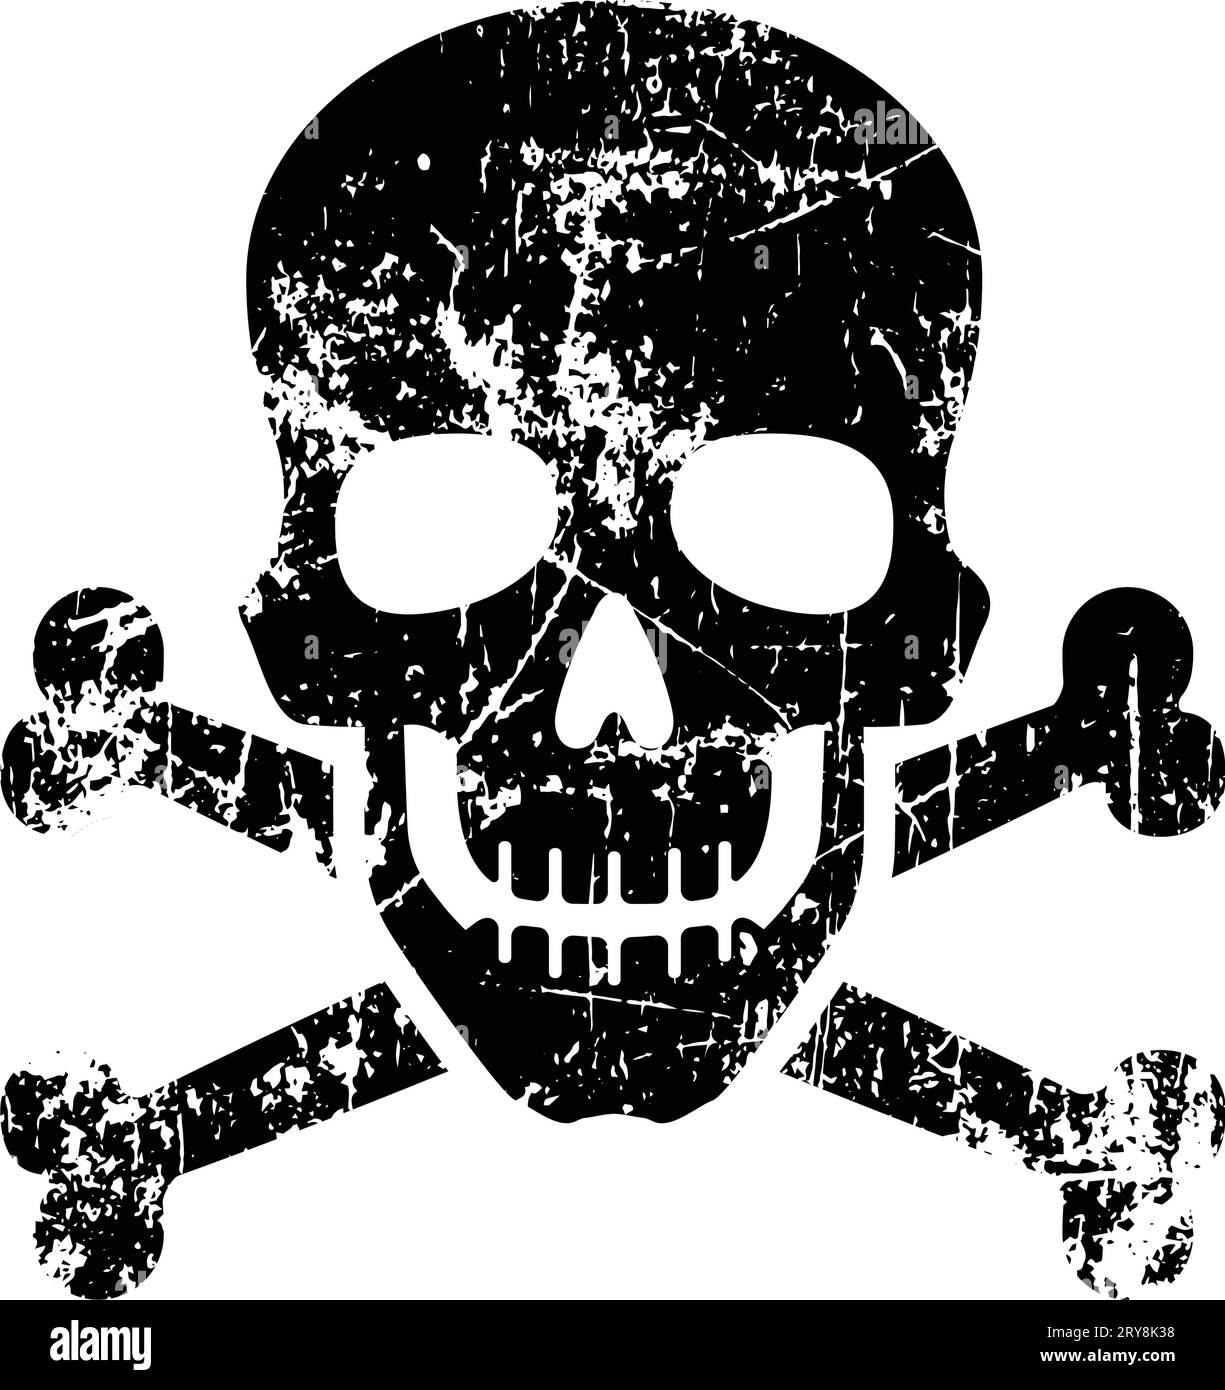 classic poison skull and crossbones warning danger distressed grunge scratched symbol silhouette isolated on white background vector Stock Vector